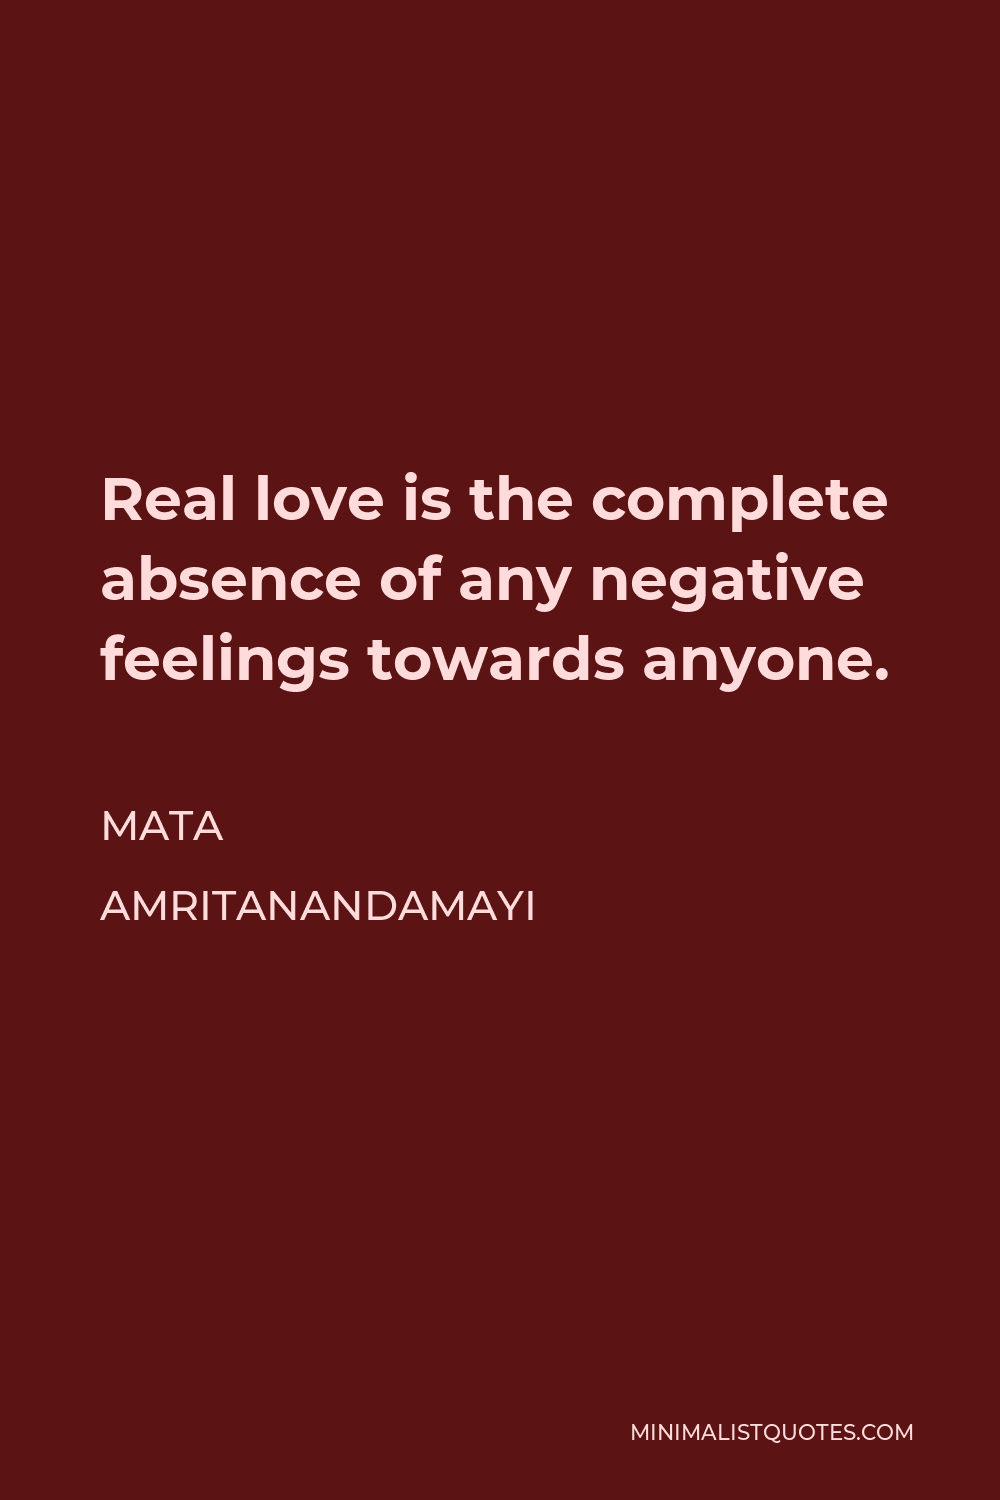 Mata Amritanandamayi Quote - Real love is the complete absence of any negative feelings towards anyone.